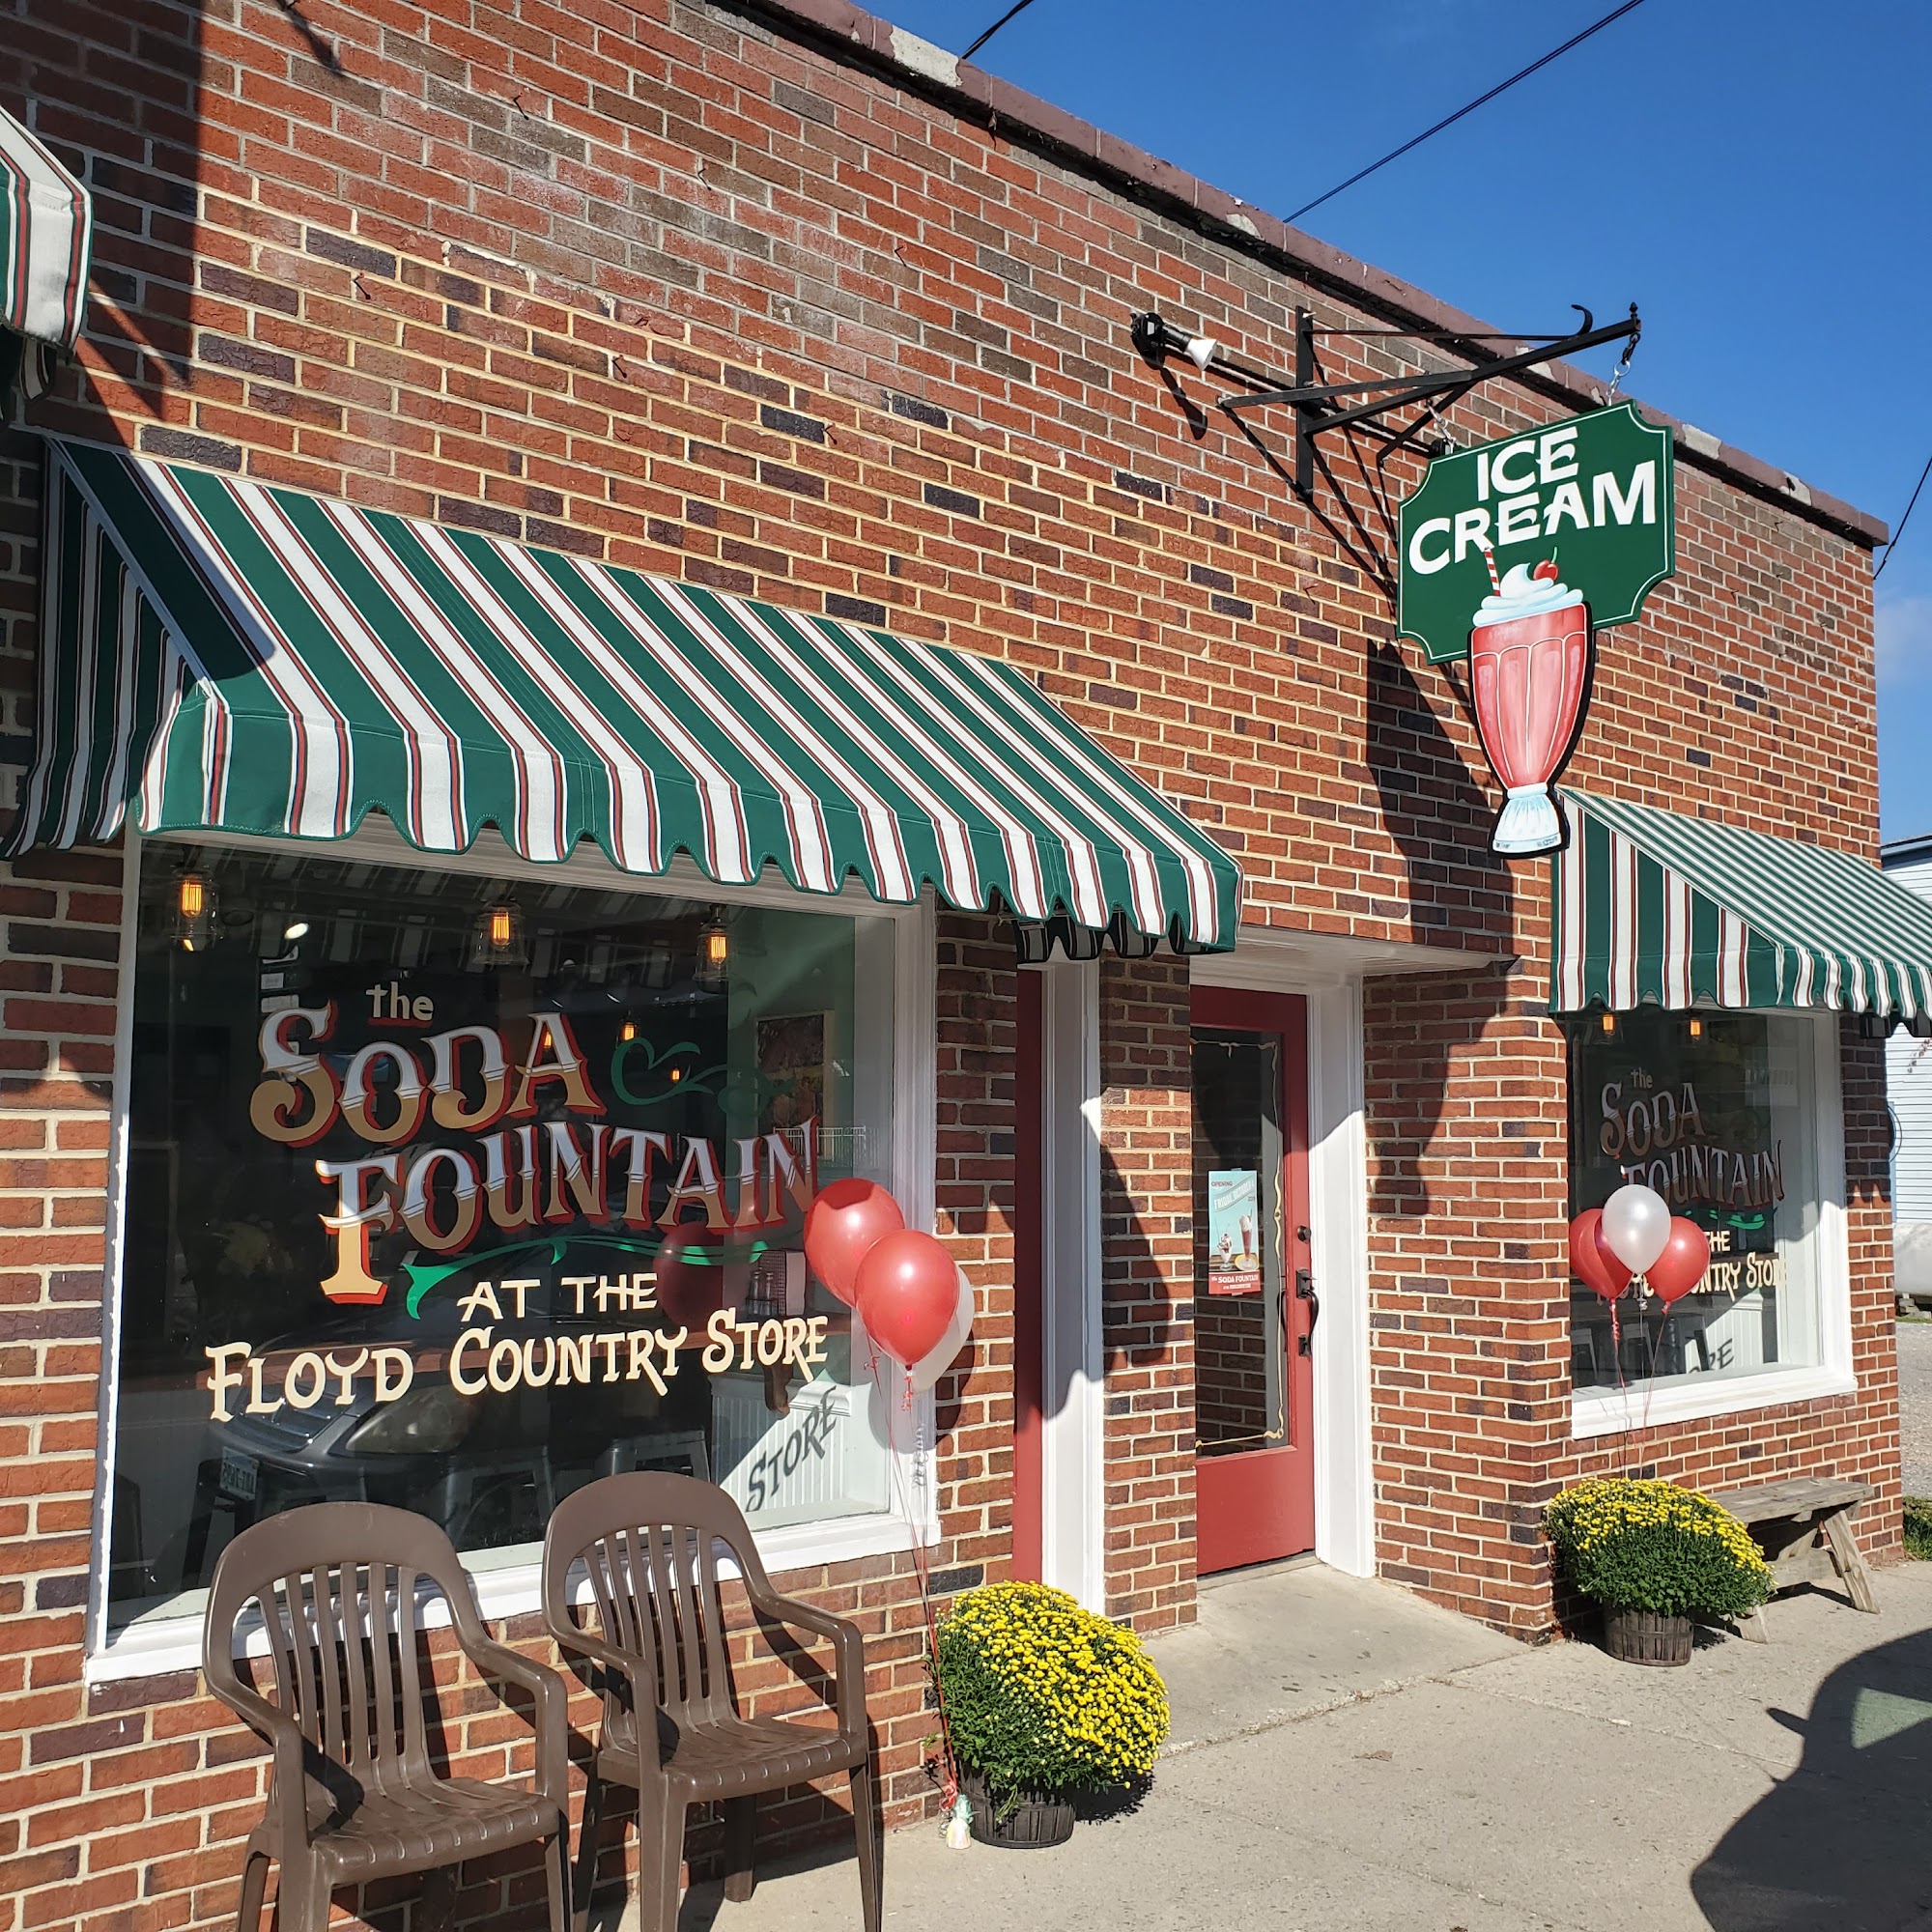 The Soda Fountain at the Floyd Country Store